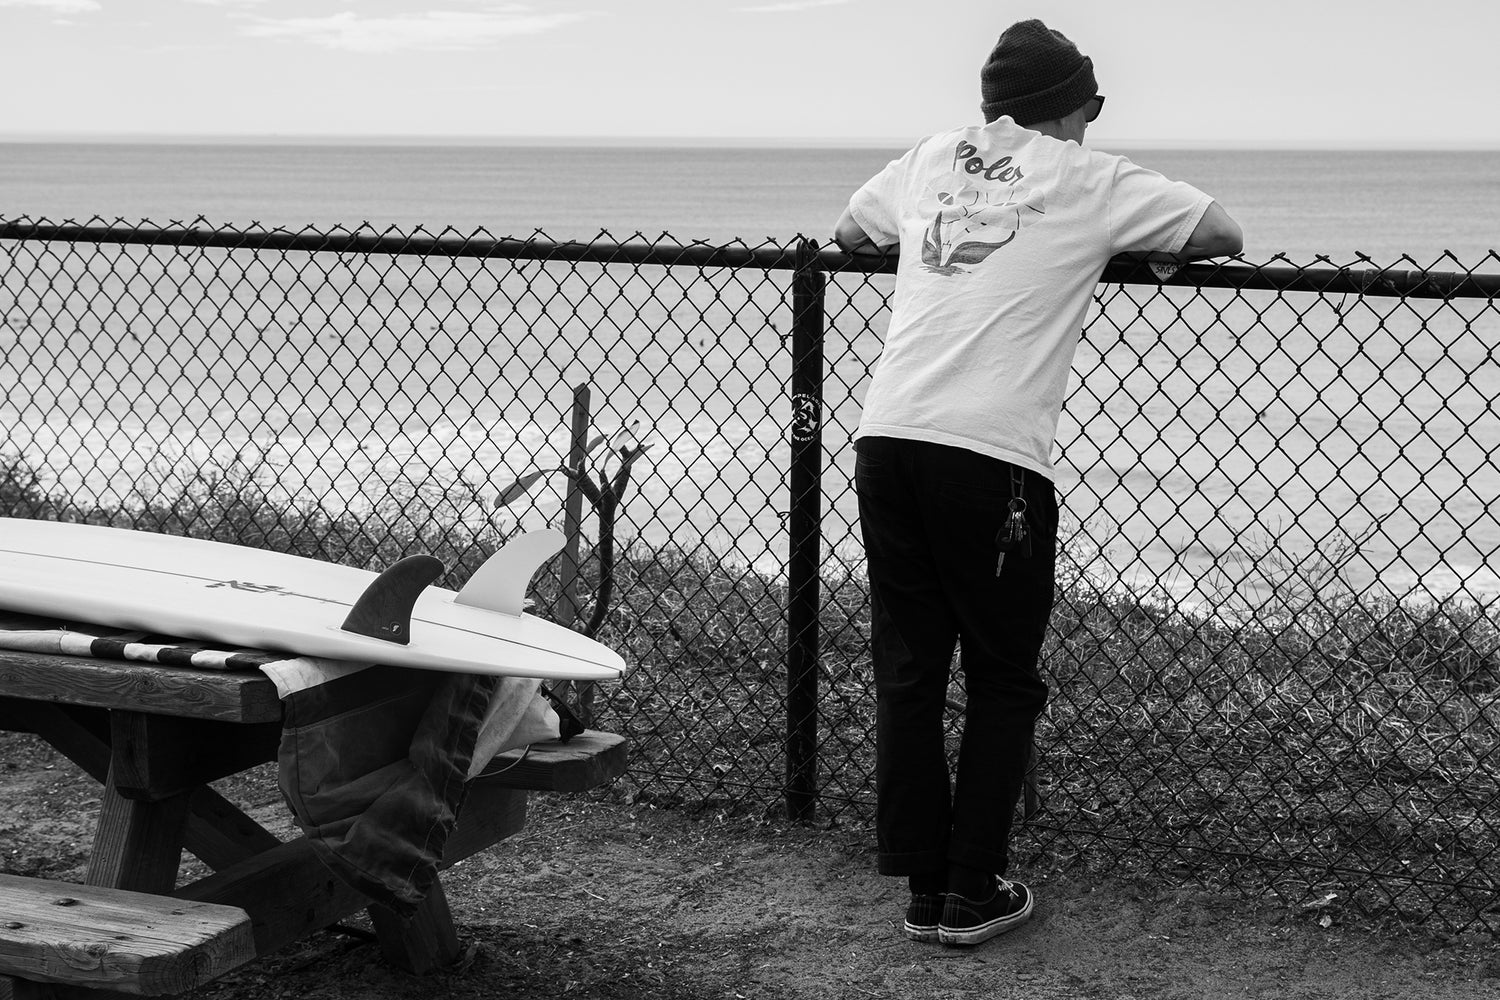 A man leaning against a fence looking out to sea with his surfboard on a picnic table.